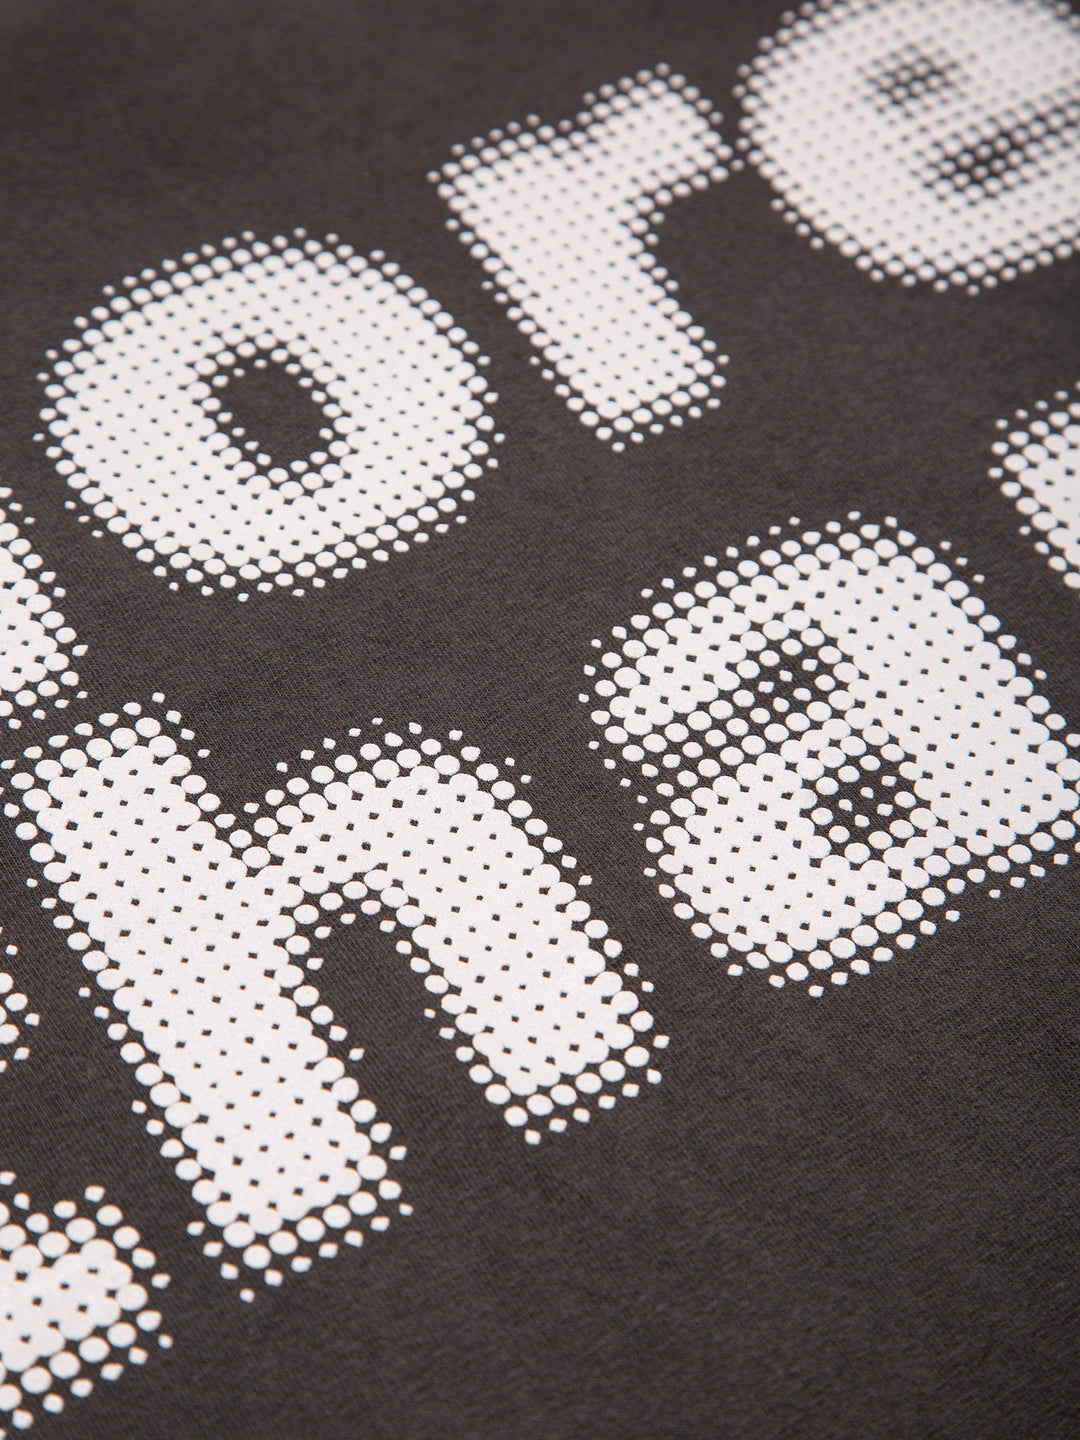 MORE THAN PIXELATED ATTRIBUTE TEE VINTAGE BLACK - close up